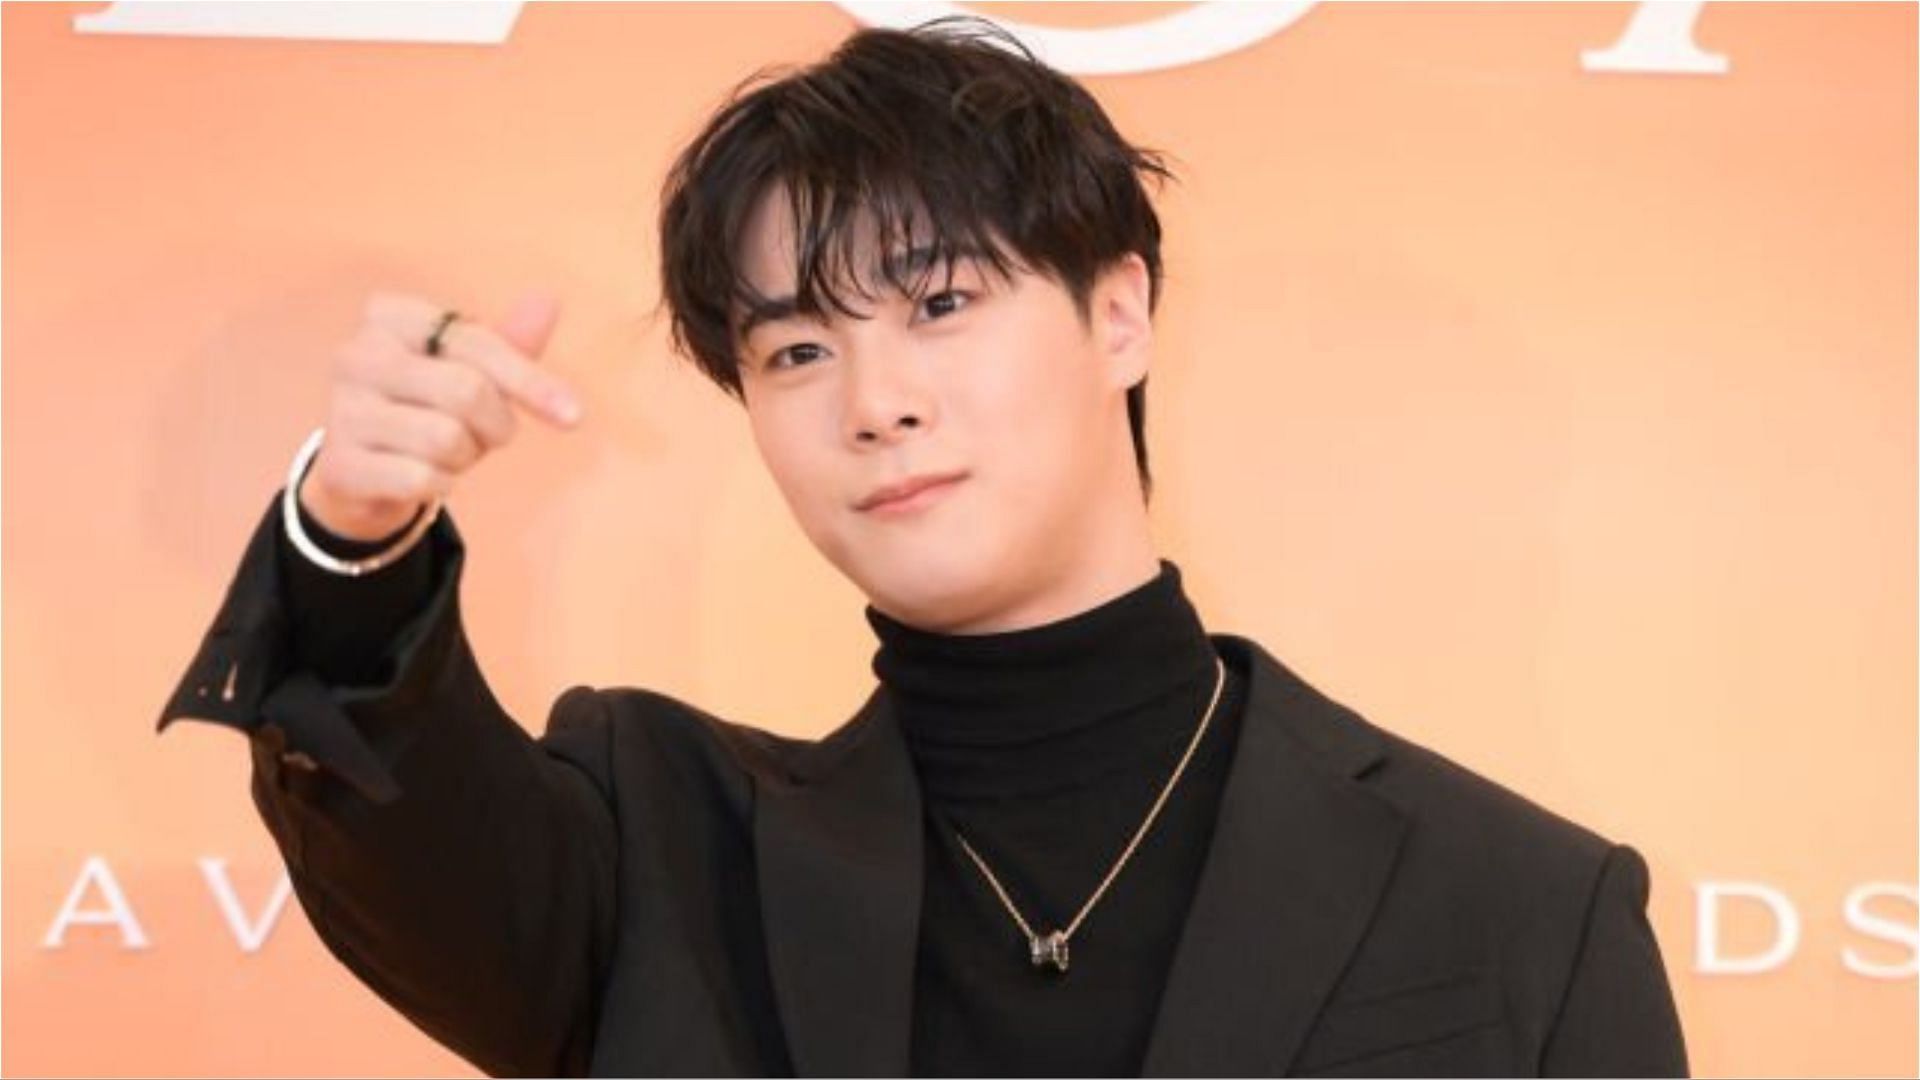 Moon Bin recently died at the age of 25 (Image via The Chosunilbo JNS/Getty Images)